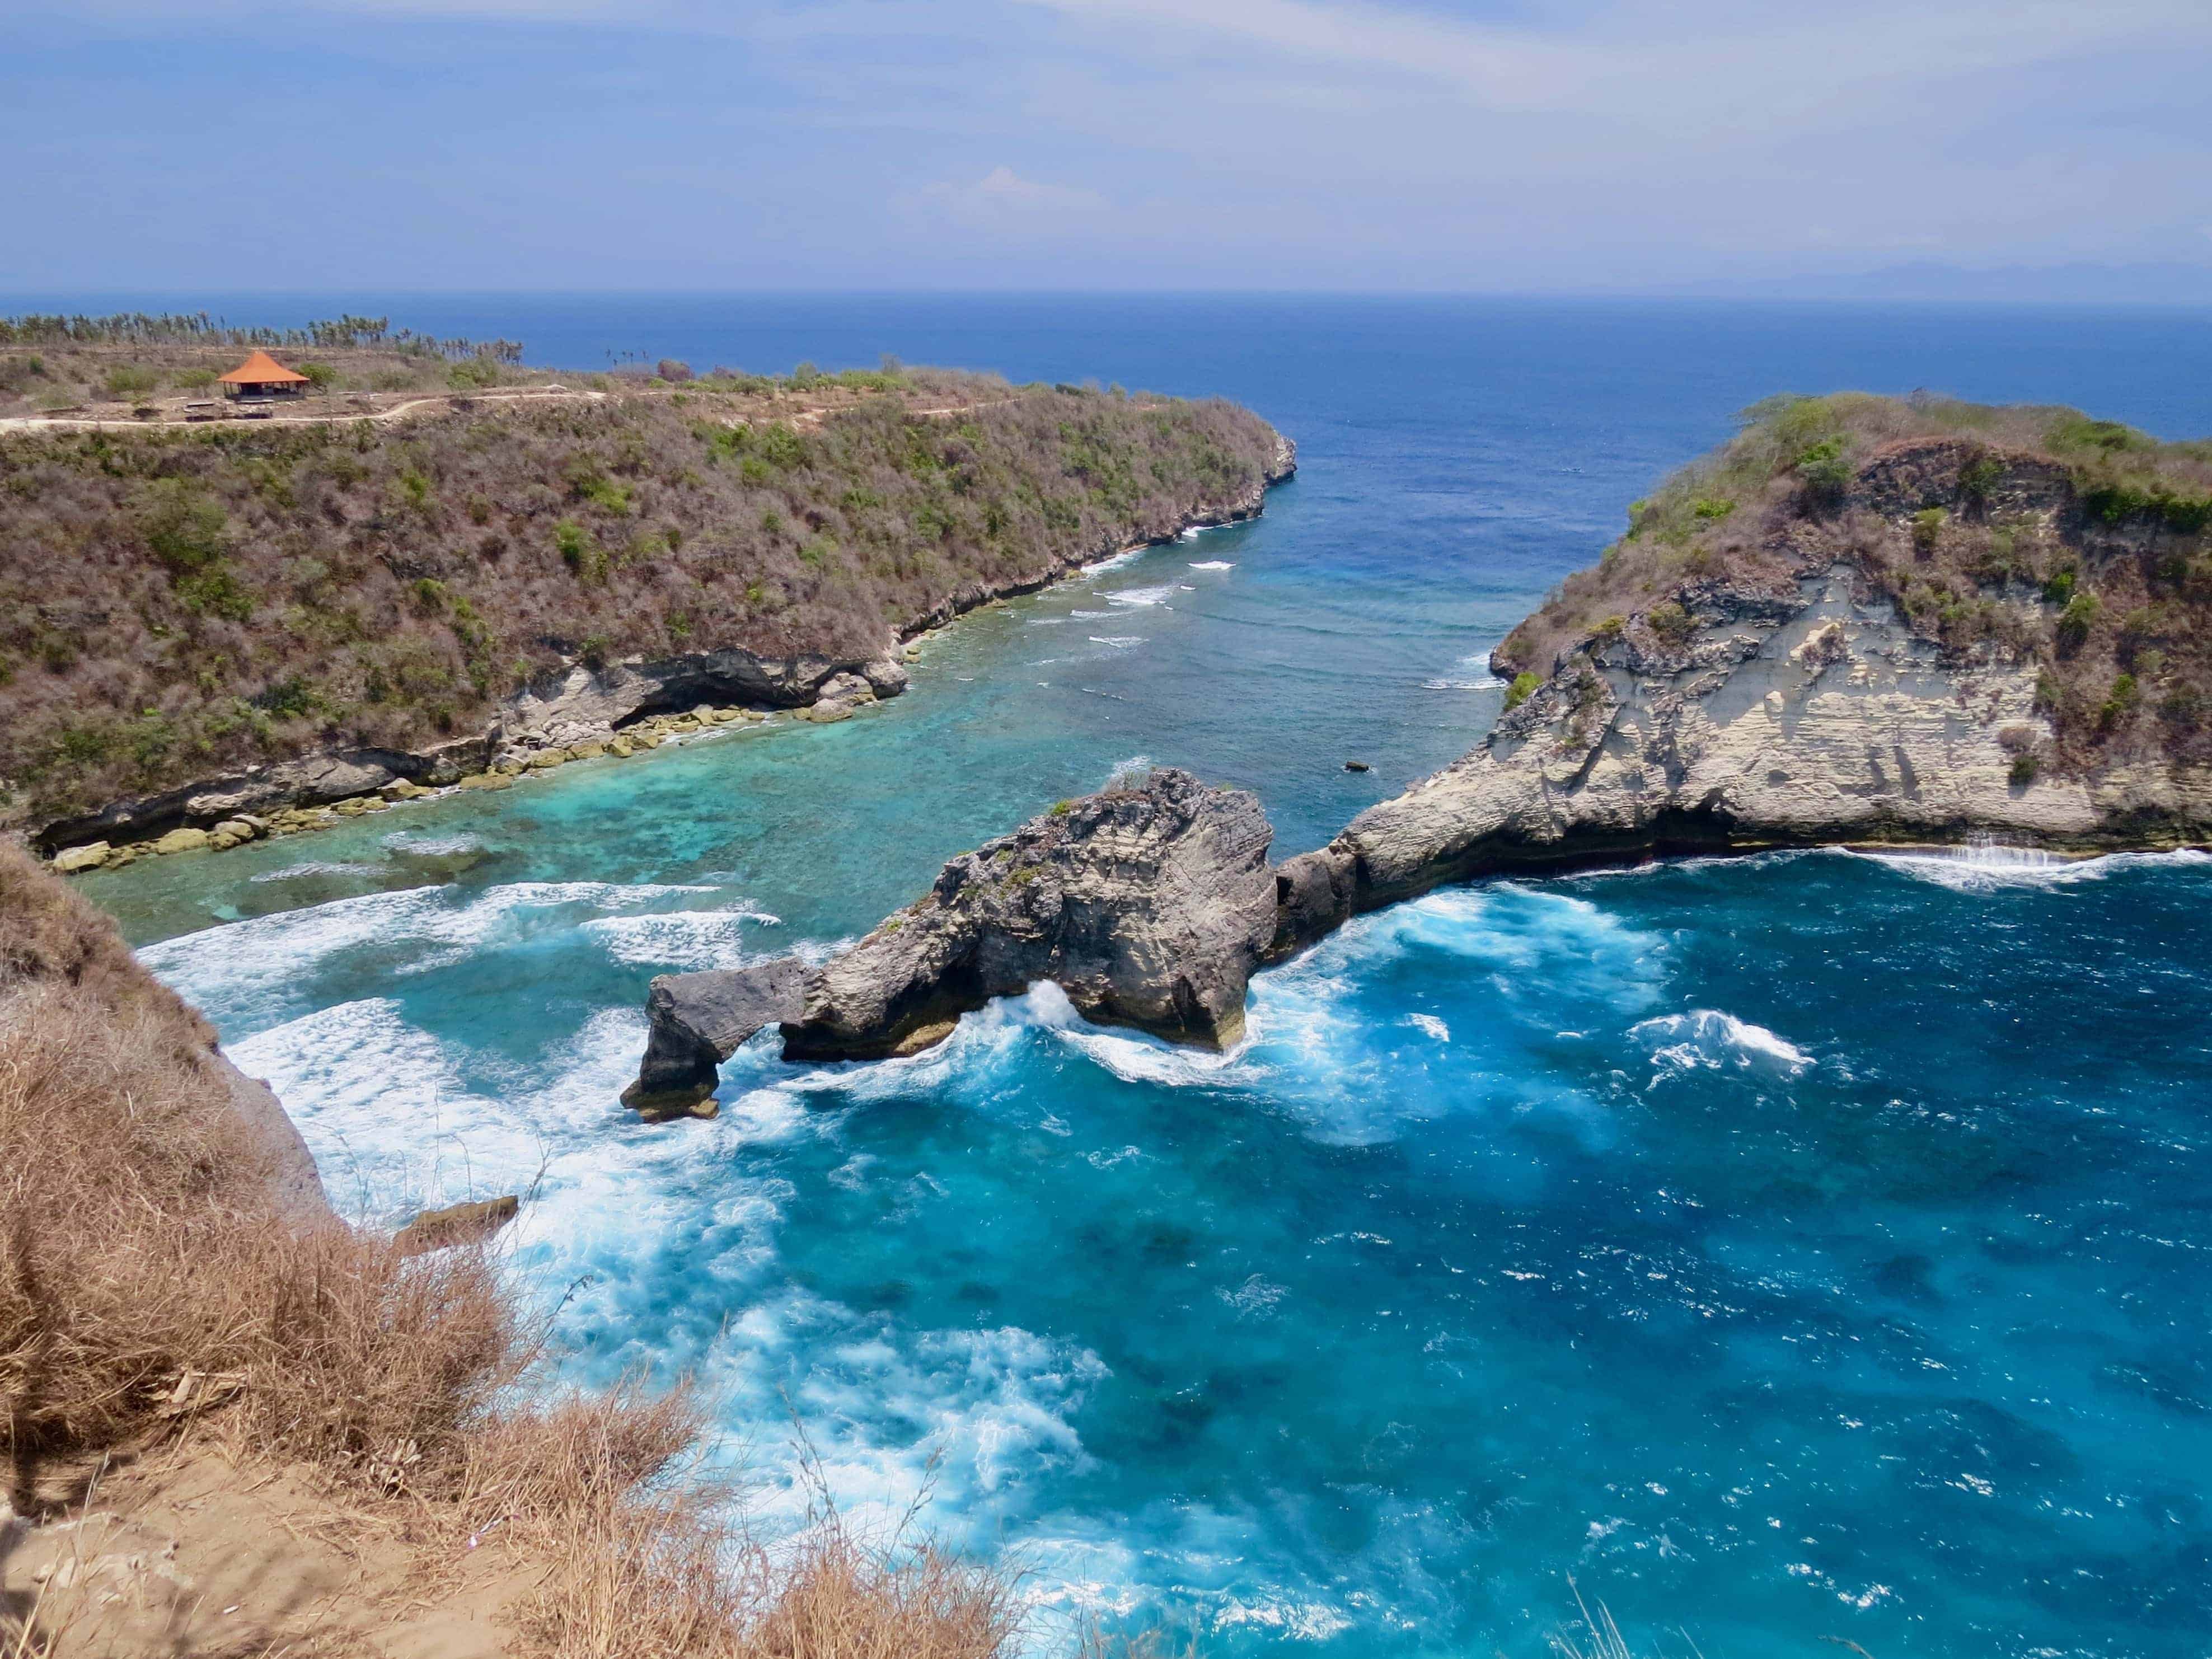 It's good to know about entry fees at Nusa Penida sights